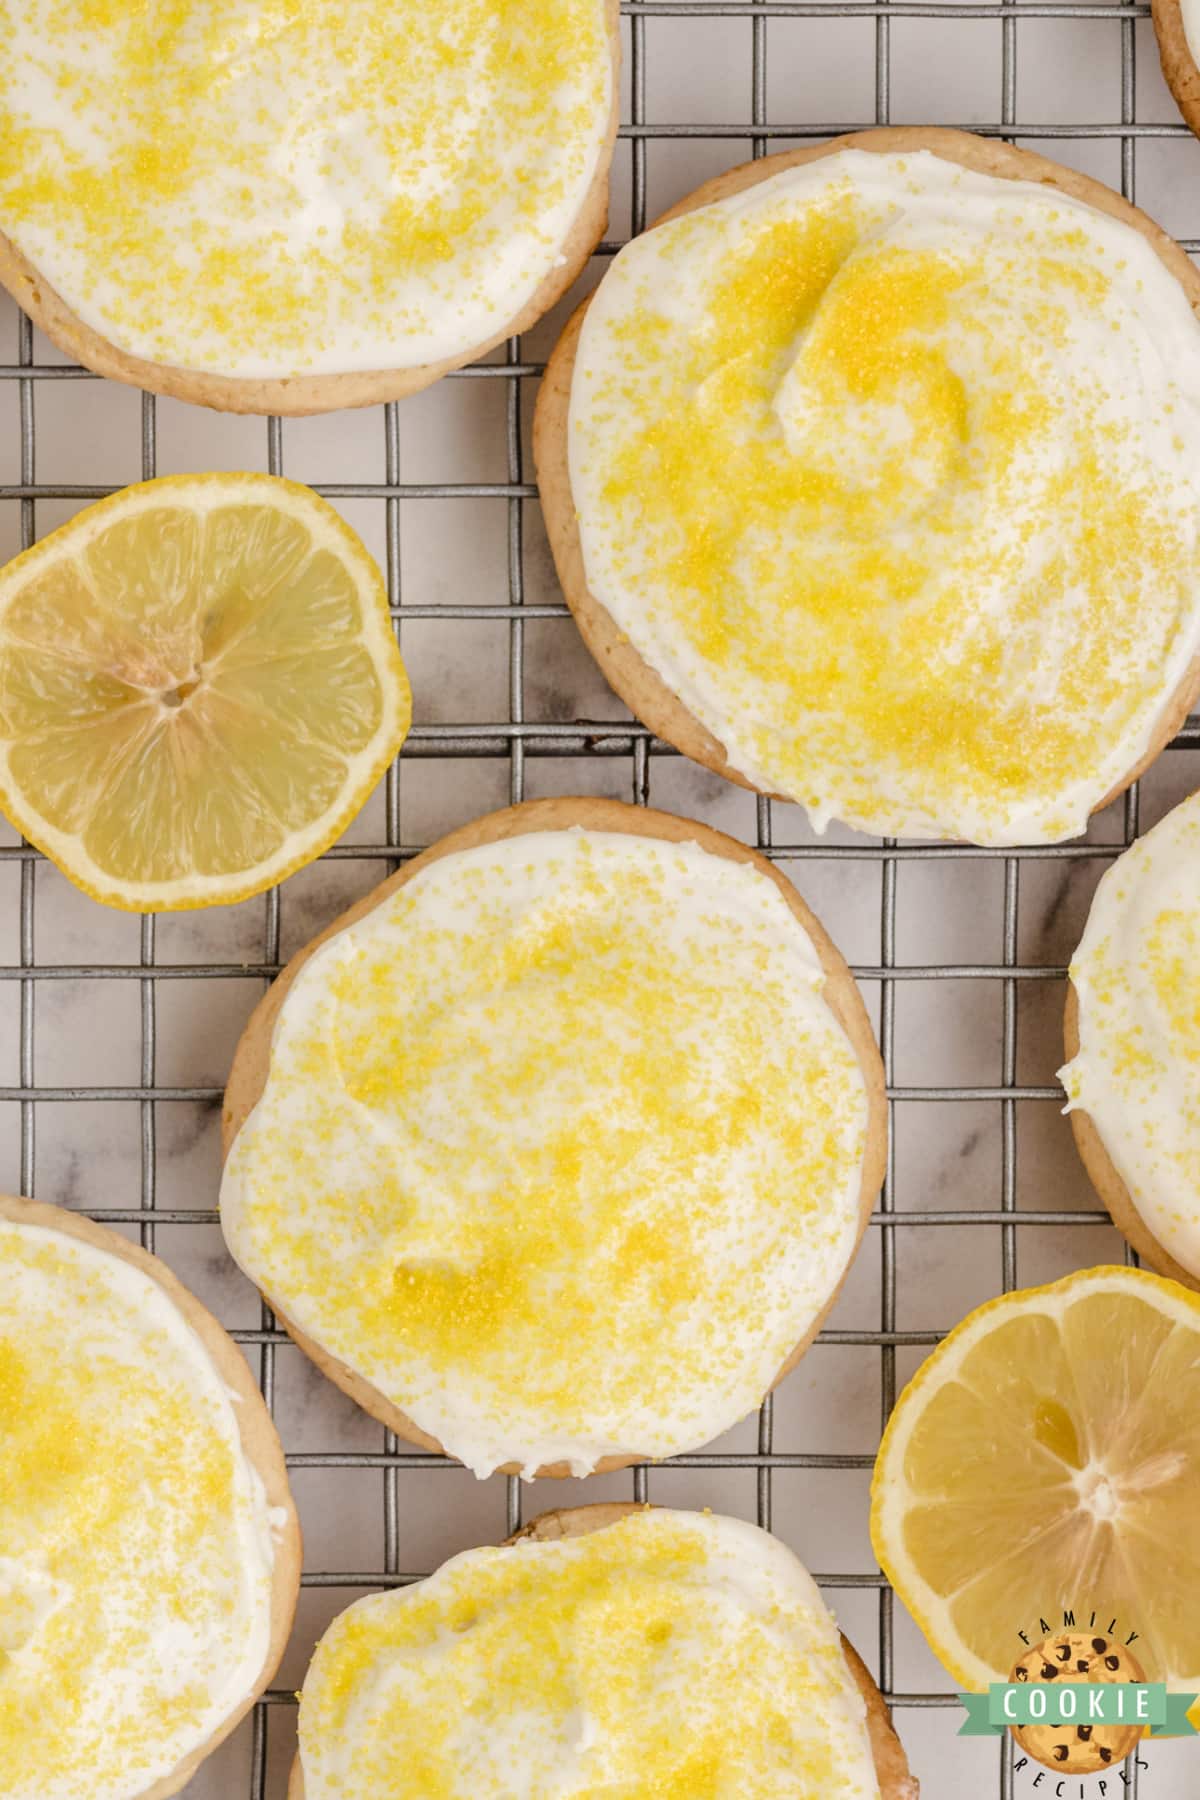 Lemon cookies made with lemonade concentrate